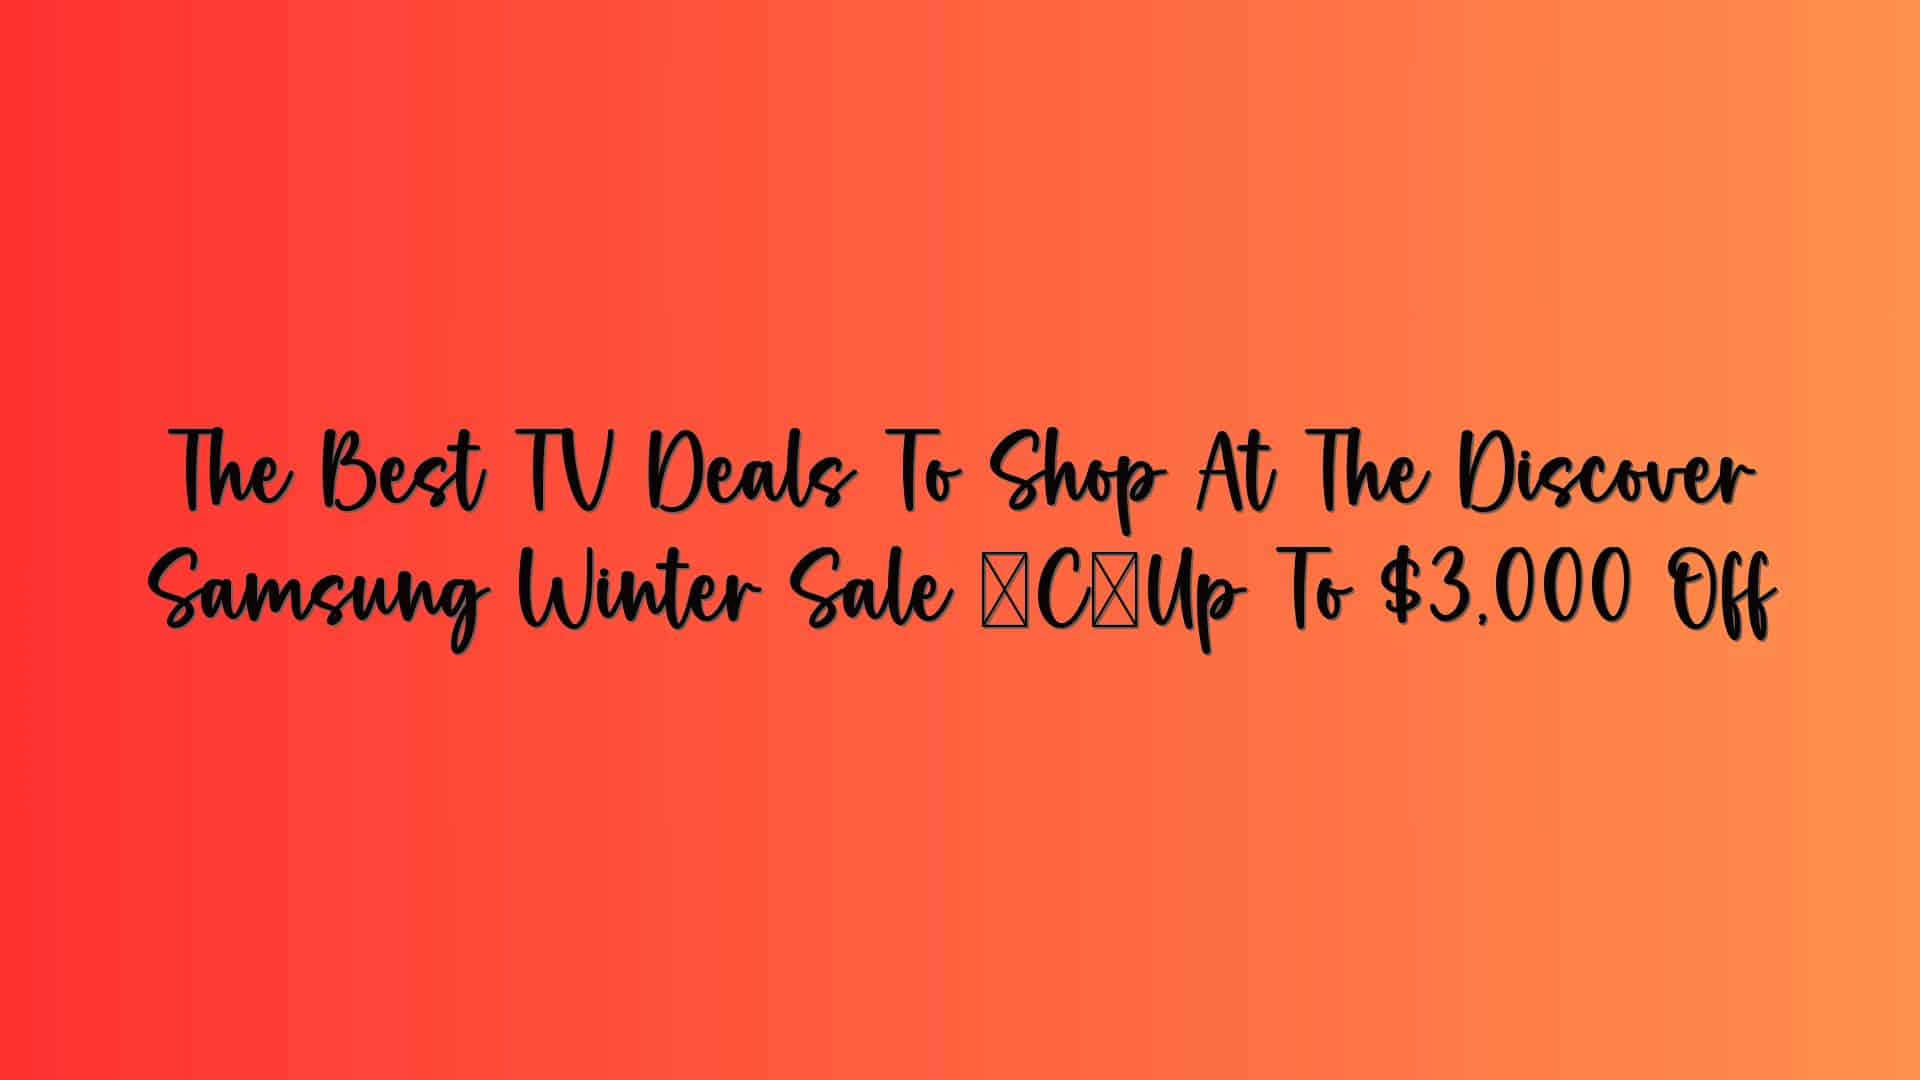 The Best TV Deals To Shop At The Discover Samsung Winter Sale — Up To $3,000 Off